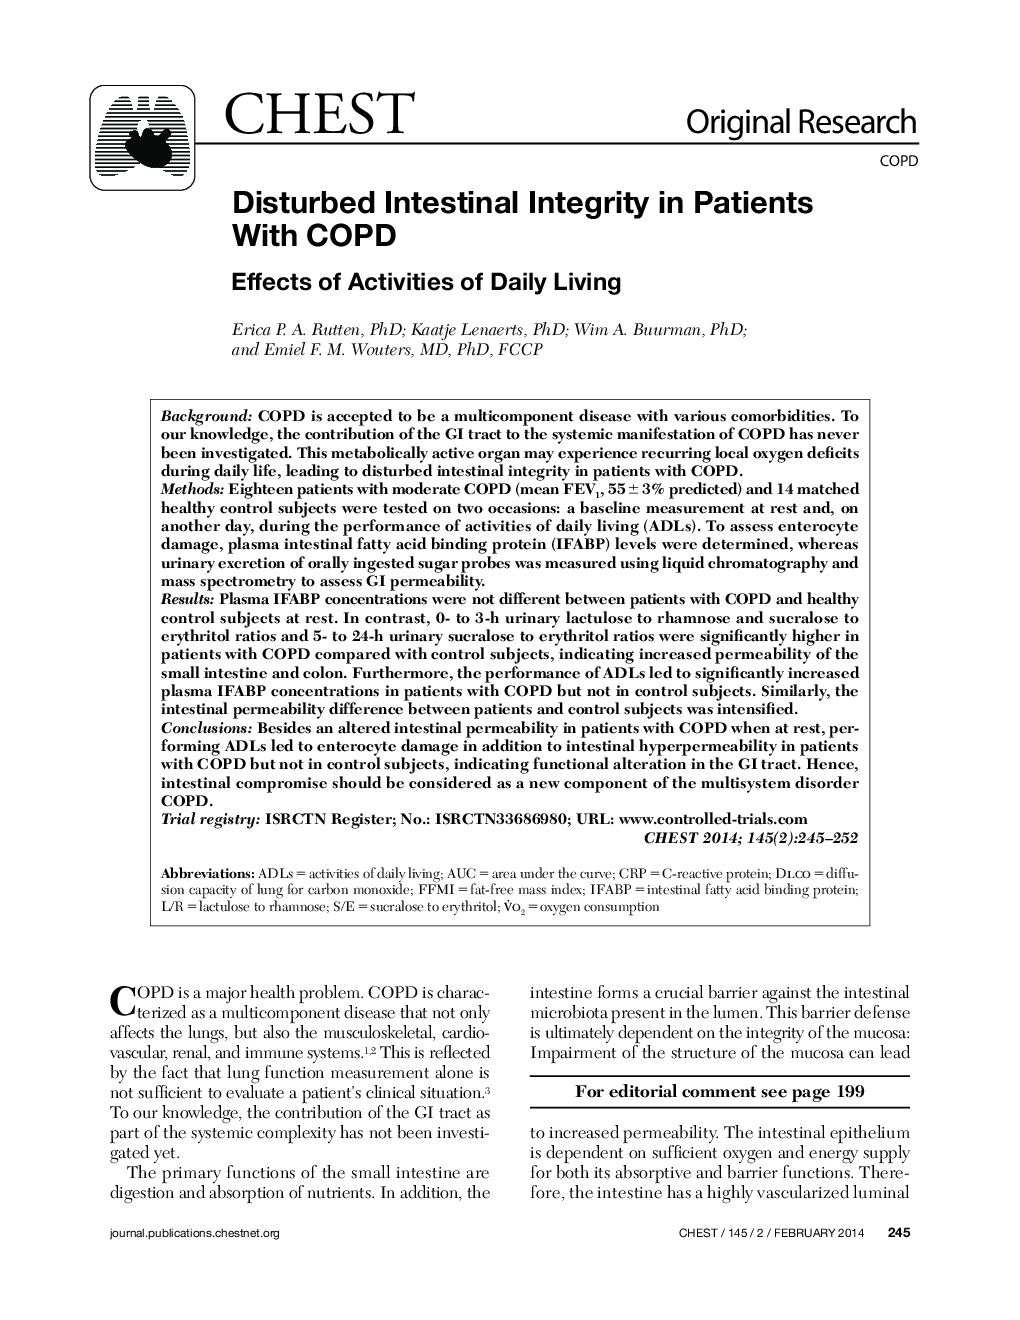 Disturbed Intestinal Integrity in Patients With COPD